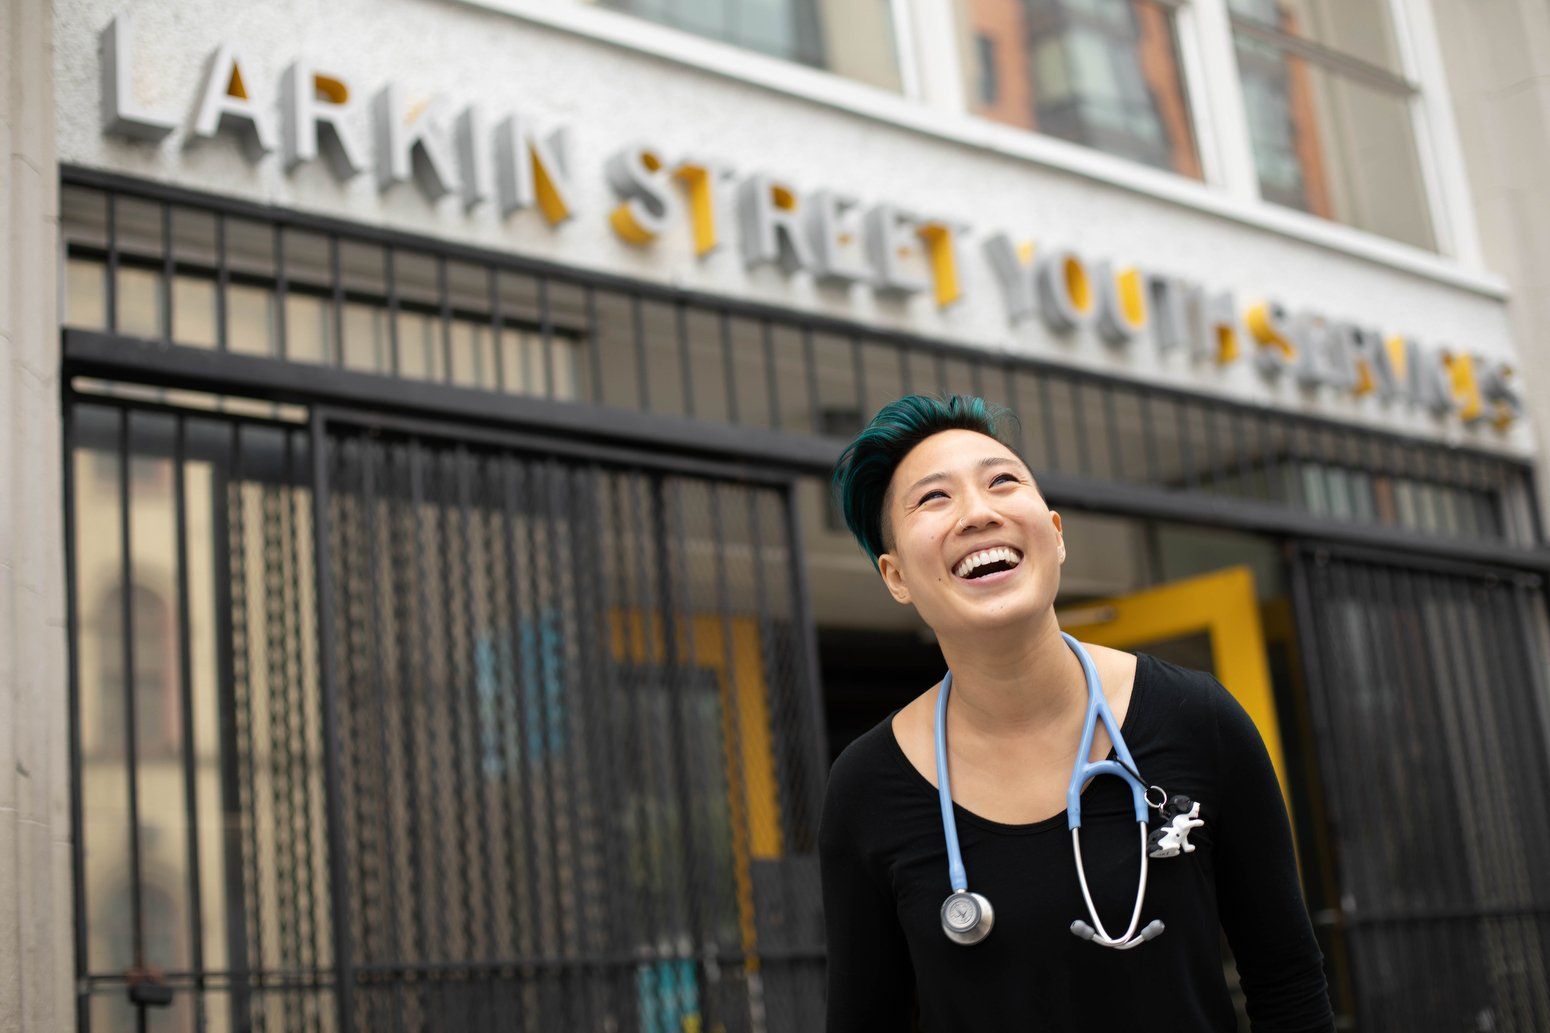 Woman wearing stethoscope laughing outside Larkin Street Youth Services